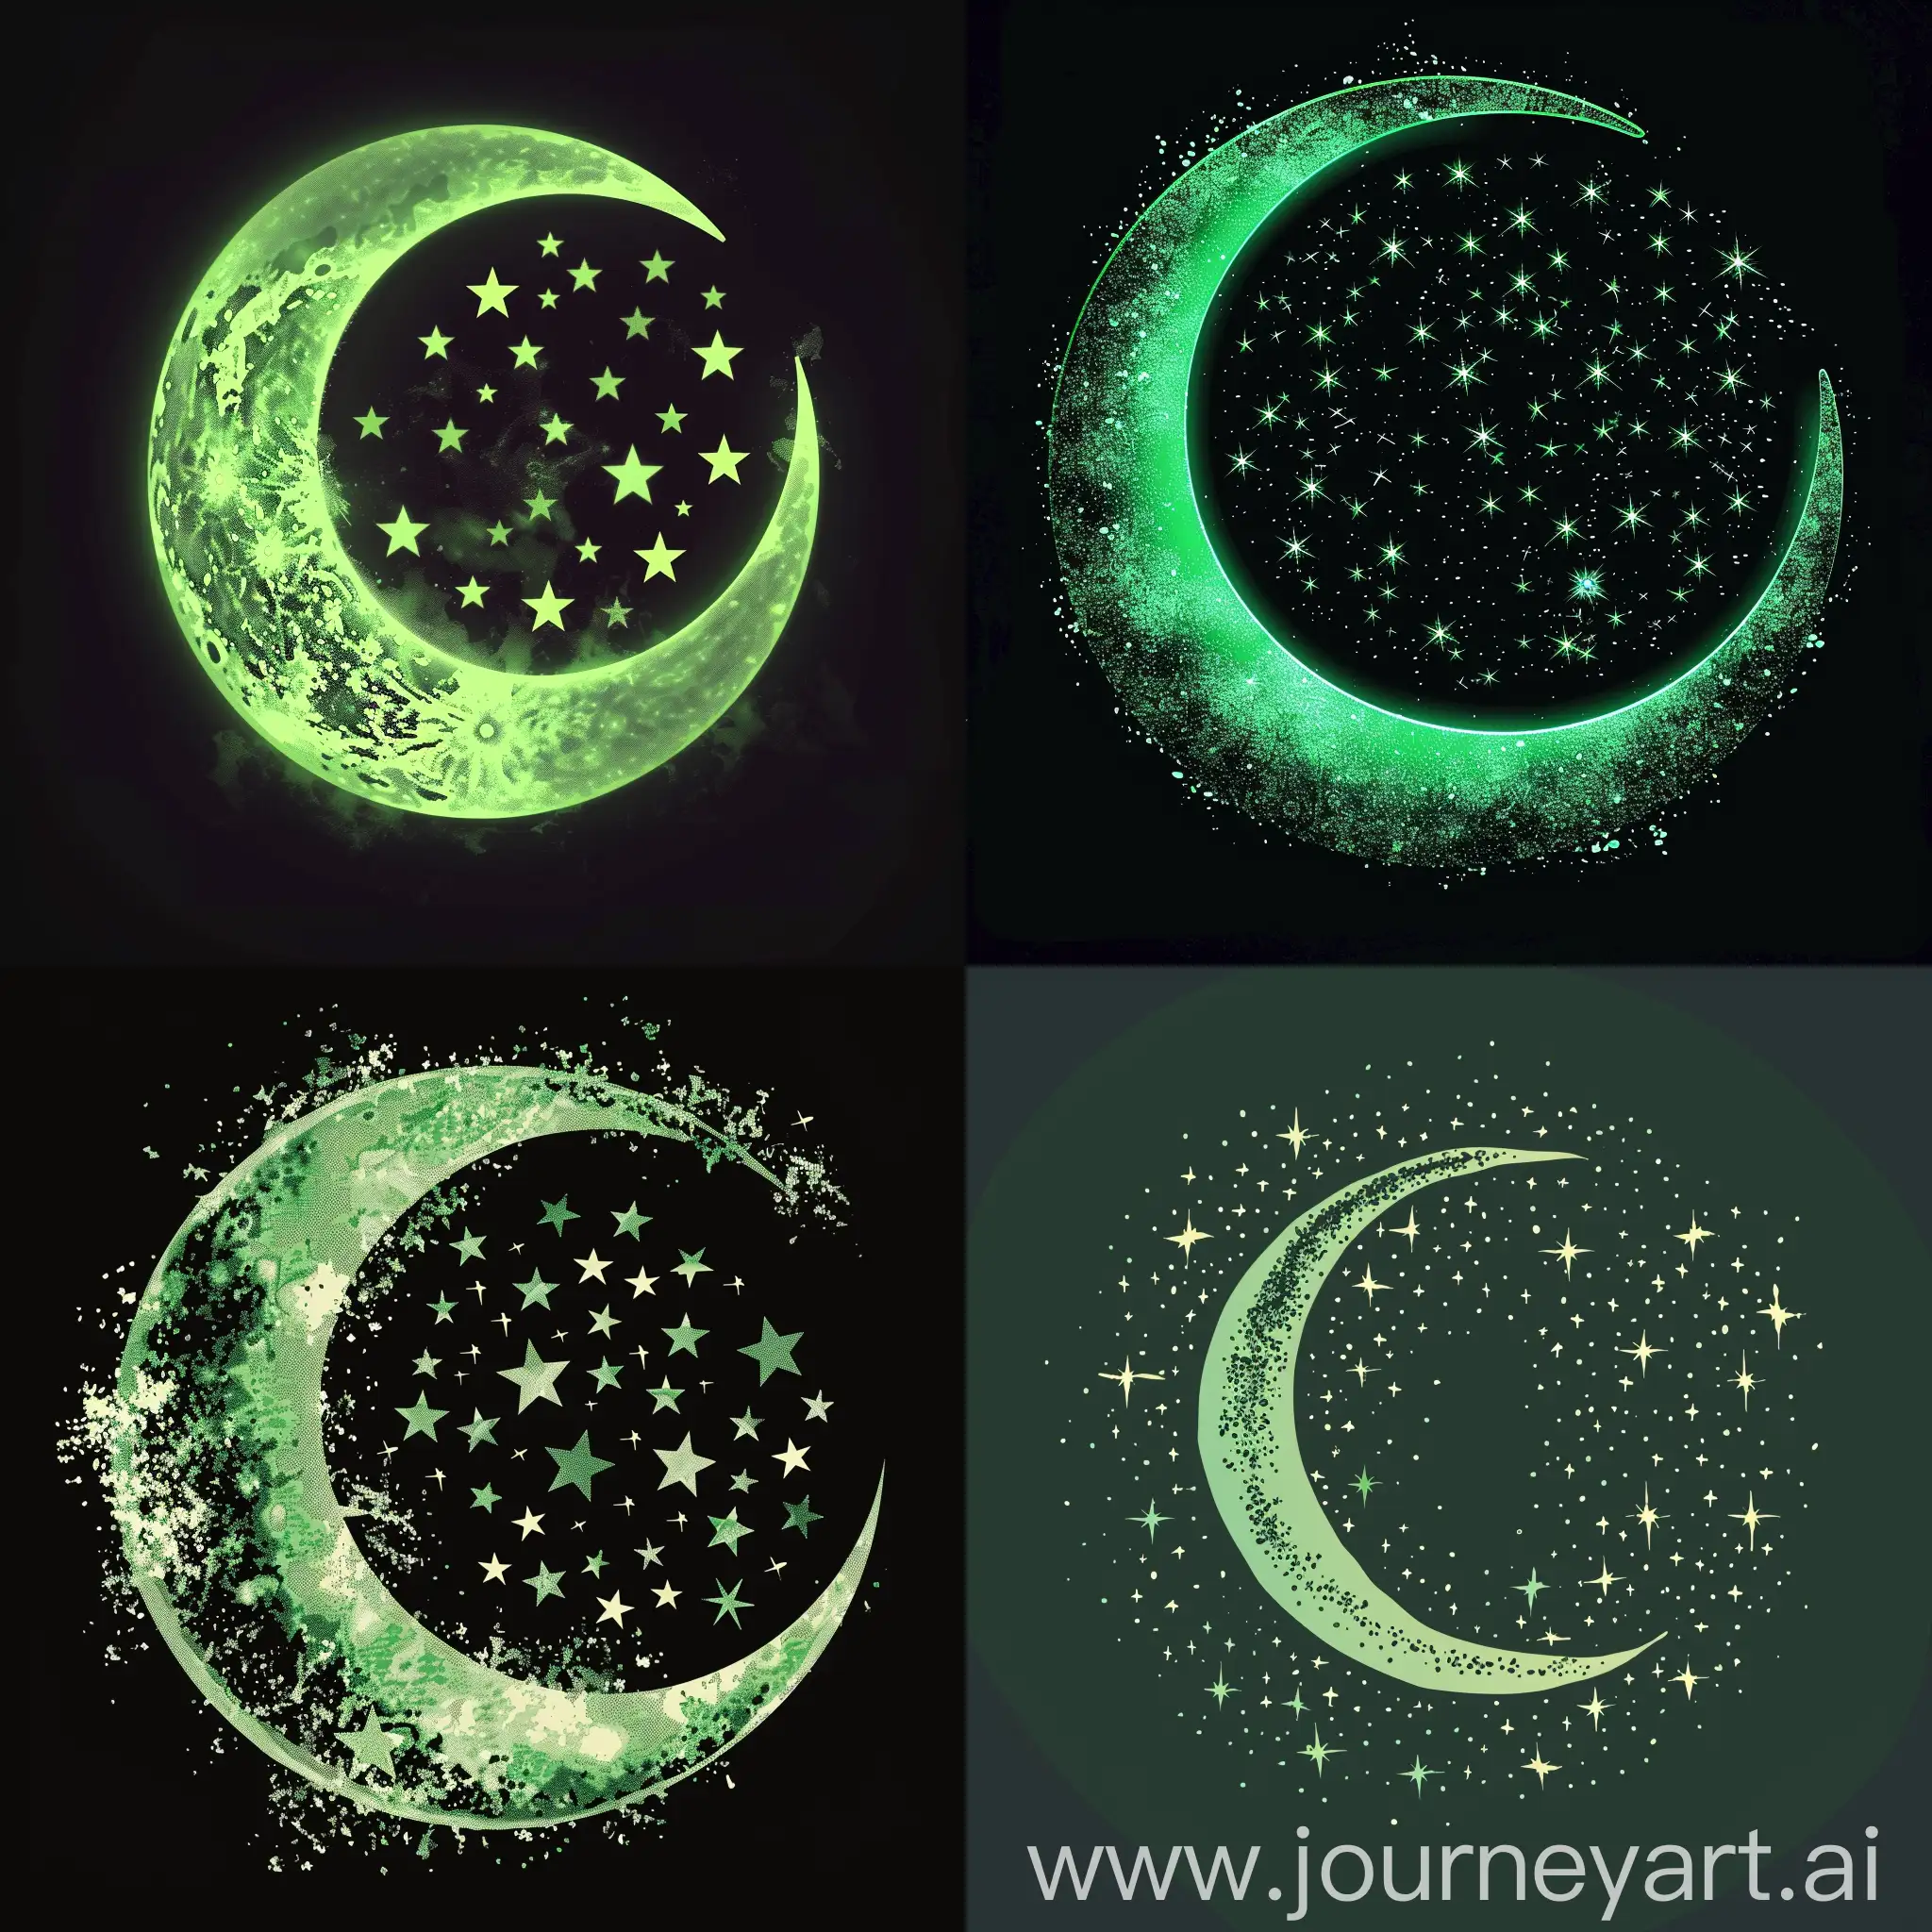 crescent moon inside multistars in green color